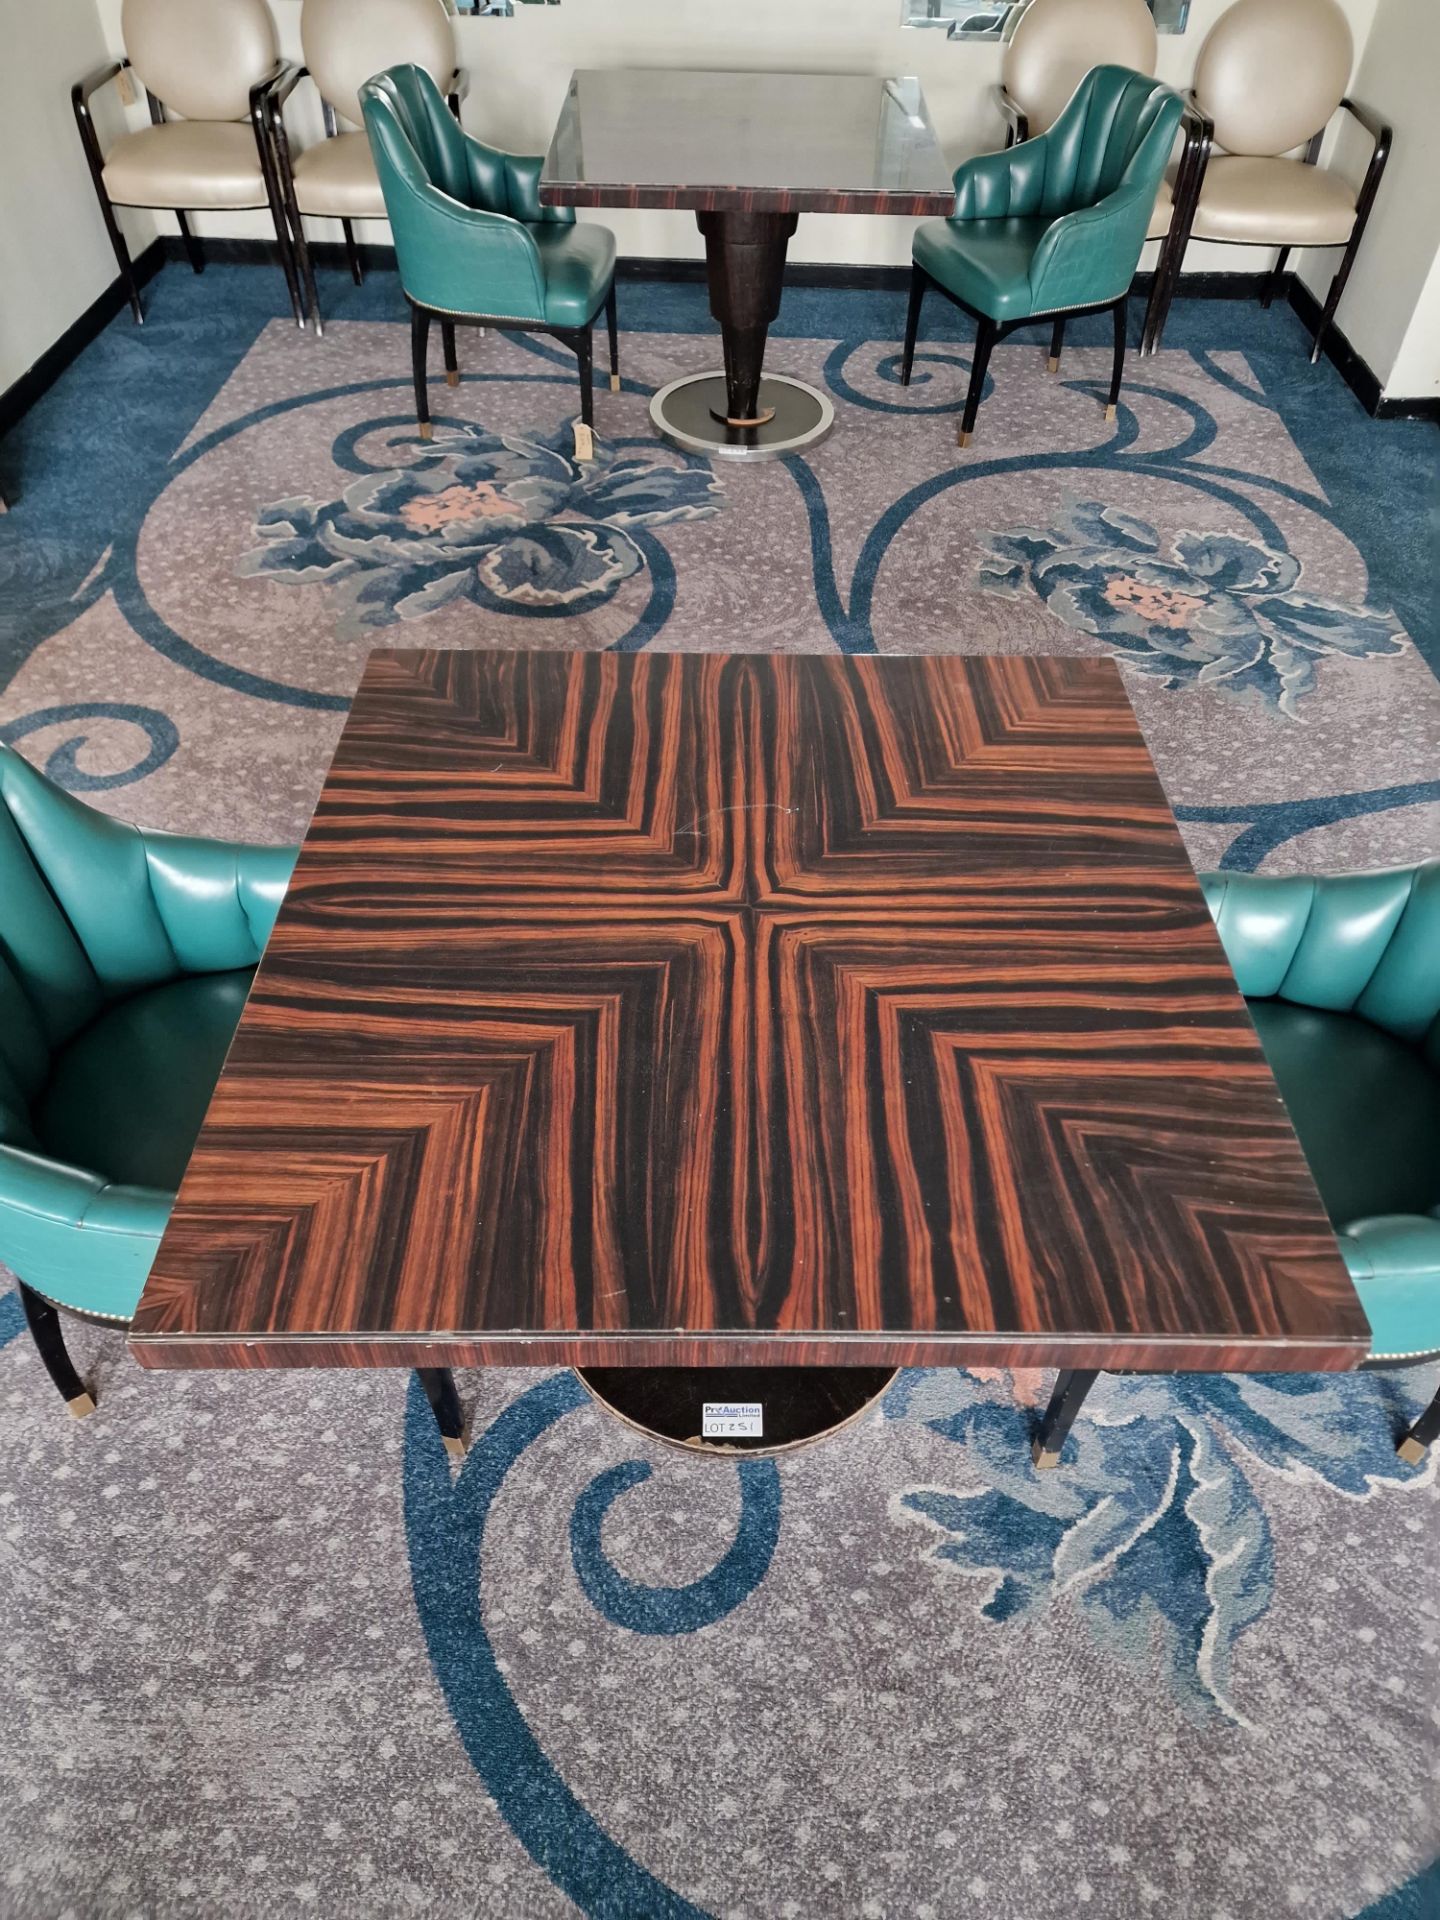 Square dining table art deco style macassar ebony and palm veneer on solid timber frame mounted on - Bild 2 aus 3